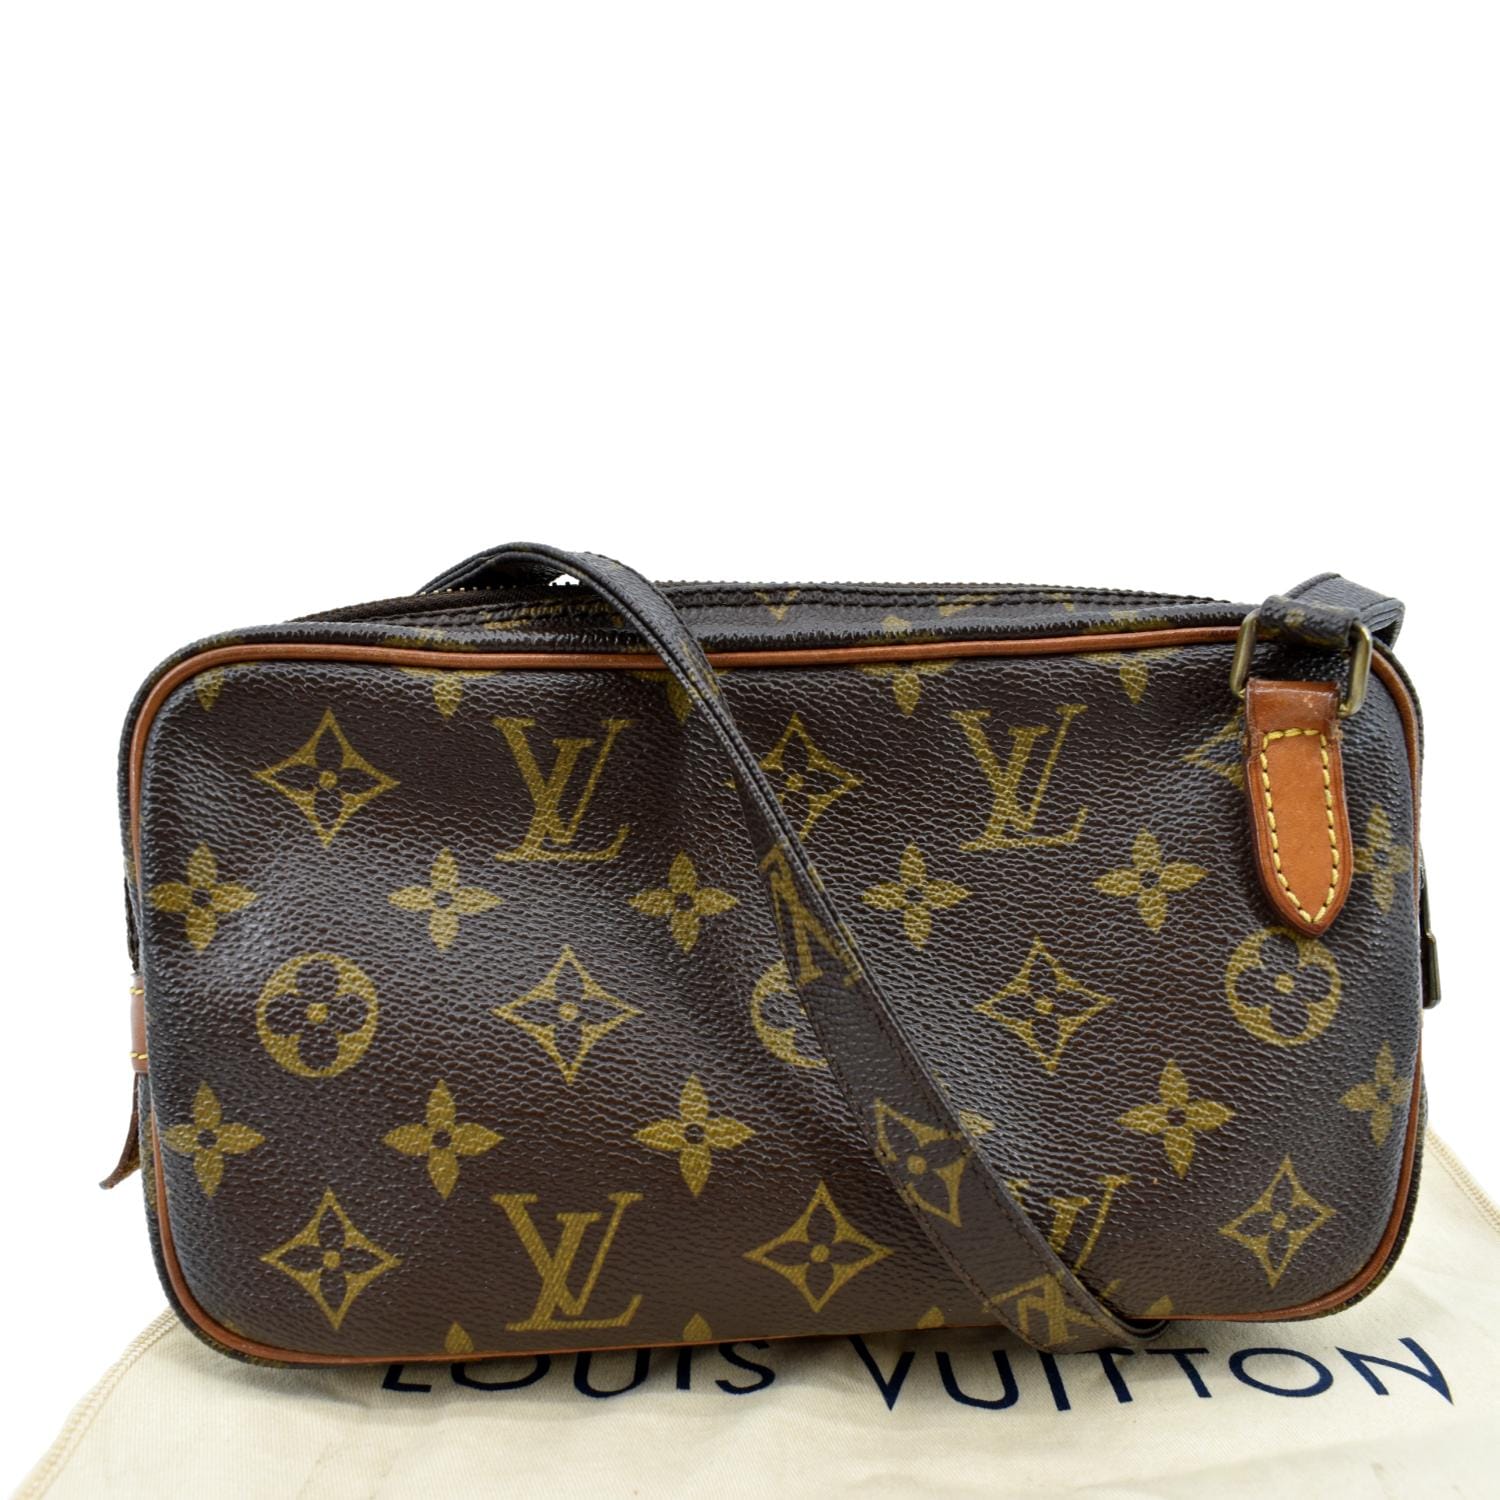 Buy [Used] LOUIS VUITTON Pochette Marly Bandouliere Shoulder Bag